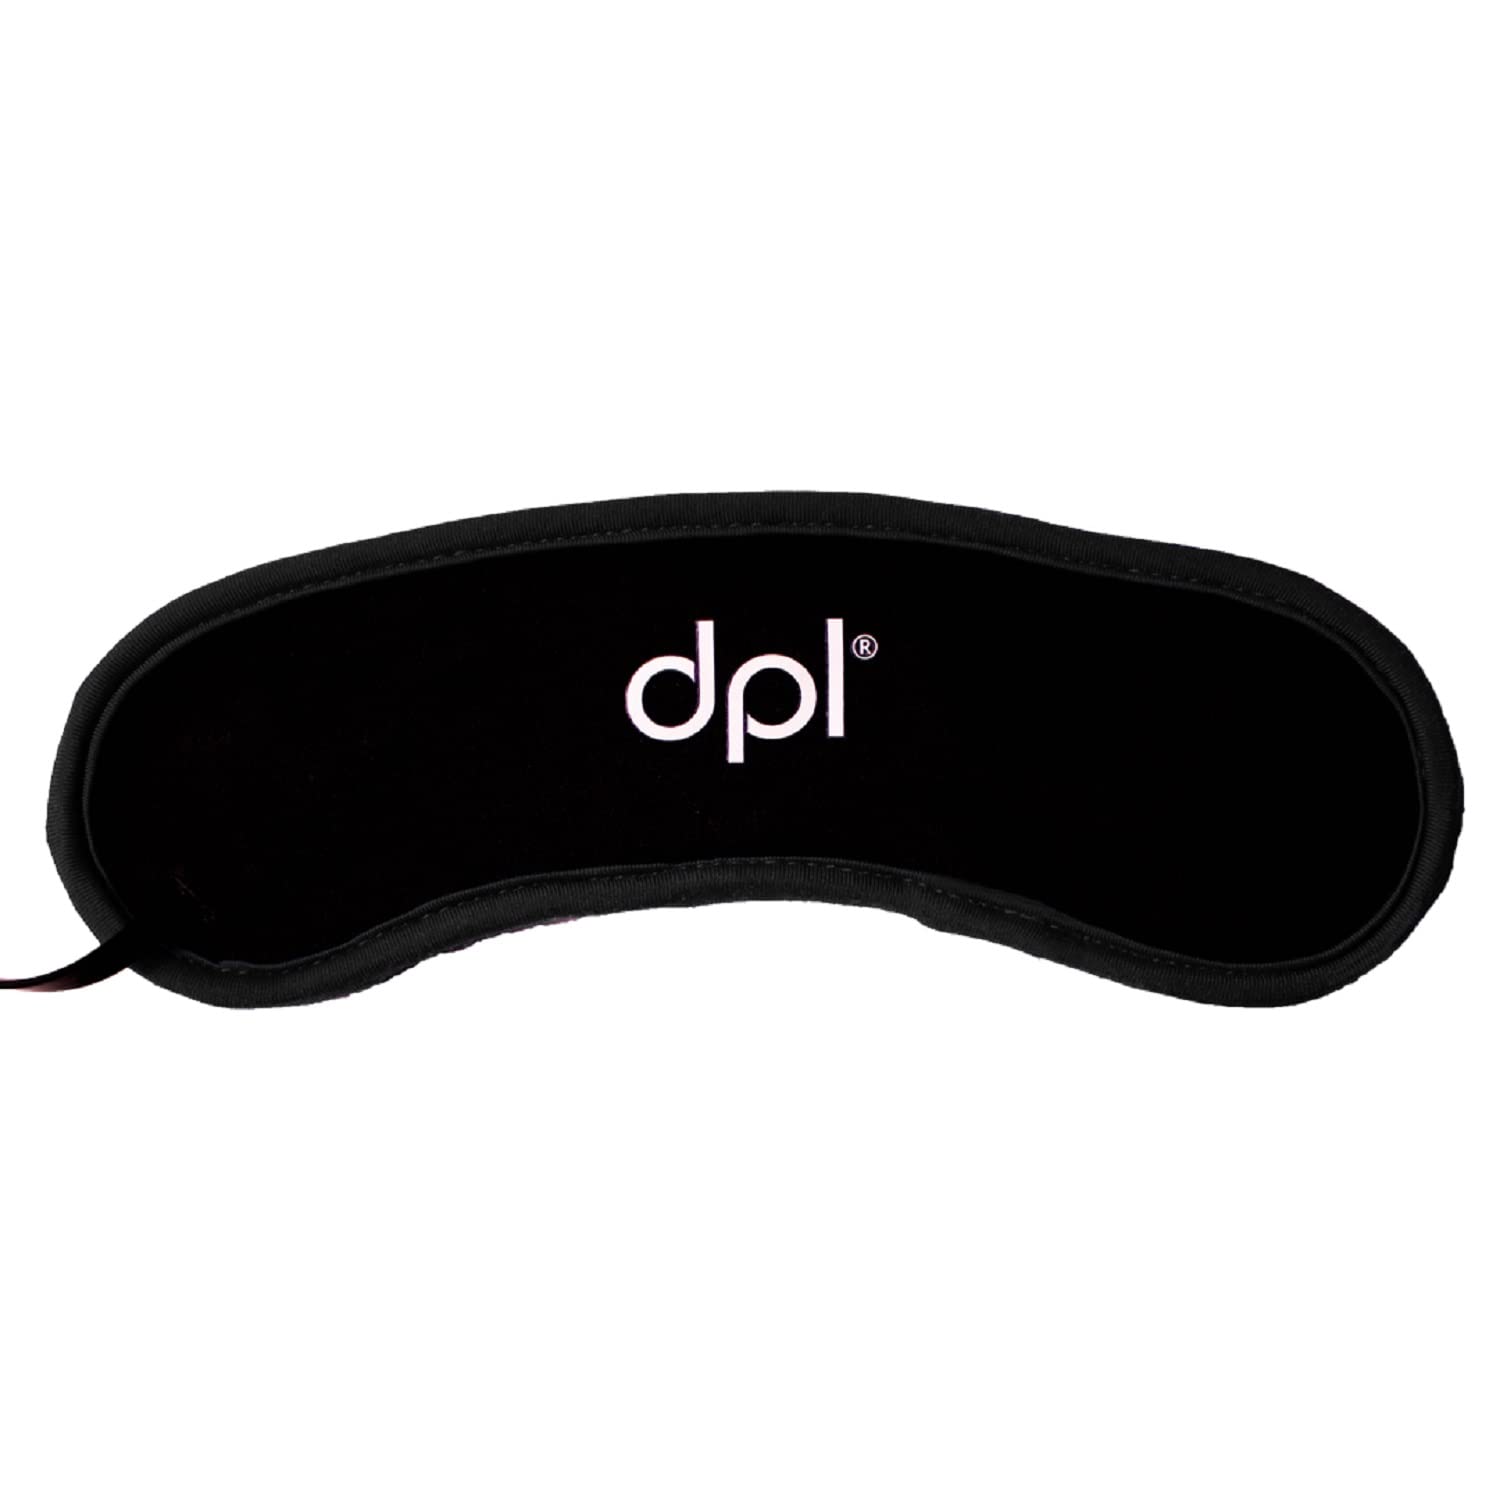 dpl Eye Mask Light Therapy for Head Pain Relief